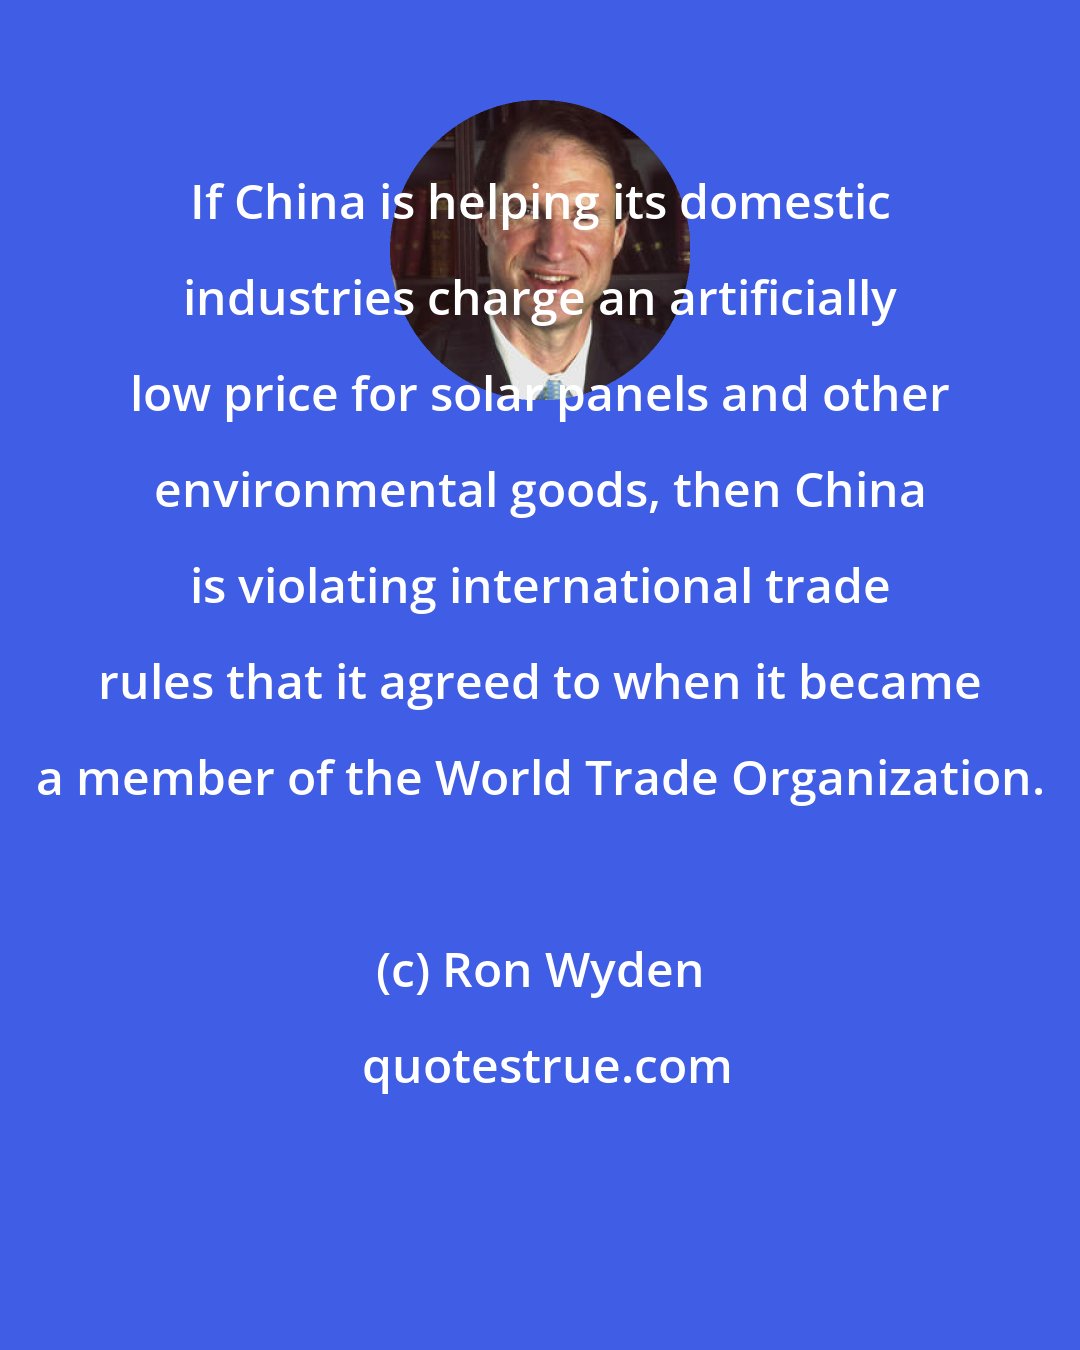 Ron Wyden: If China is helping its domestic industries charge an artificially low price for solar panels and other environmental goods, then China is violating international trade rules that it agreed to when it became a member of the World Trade Organization.